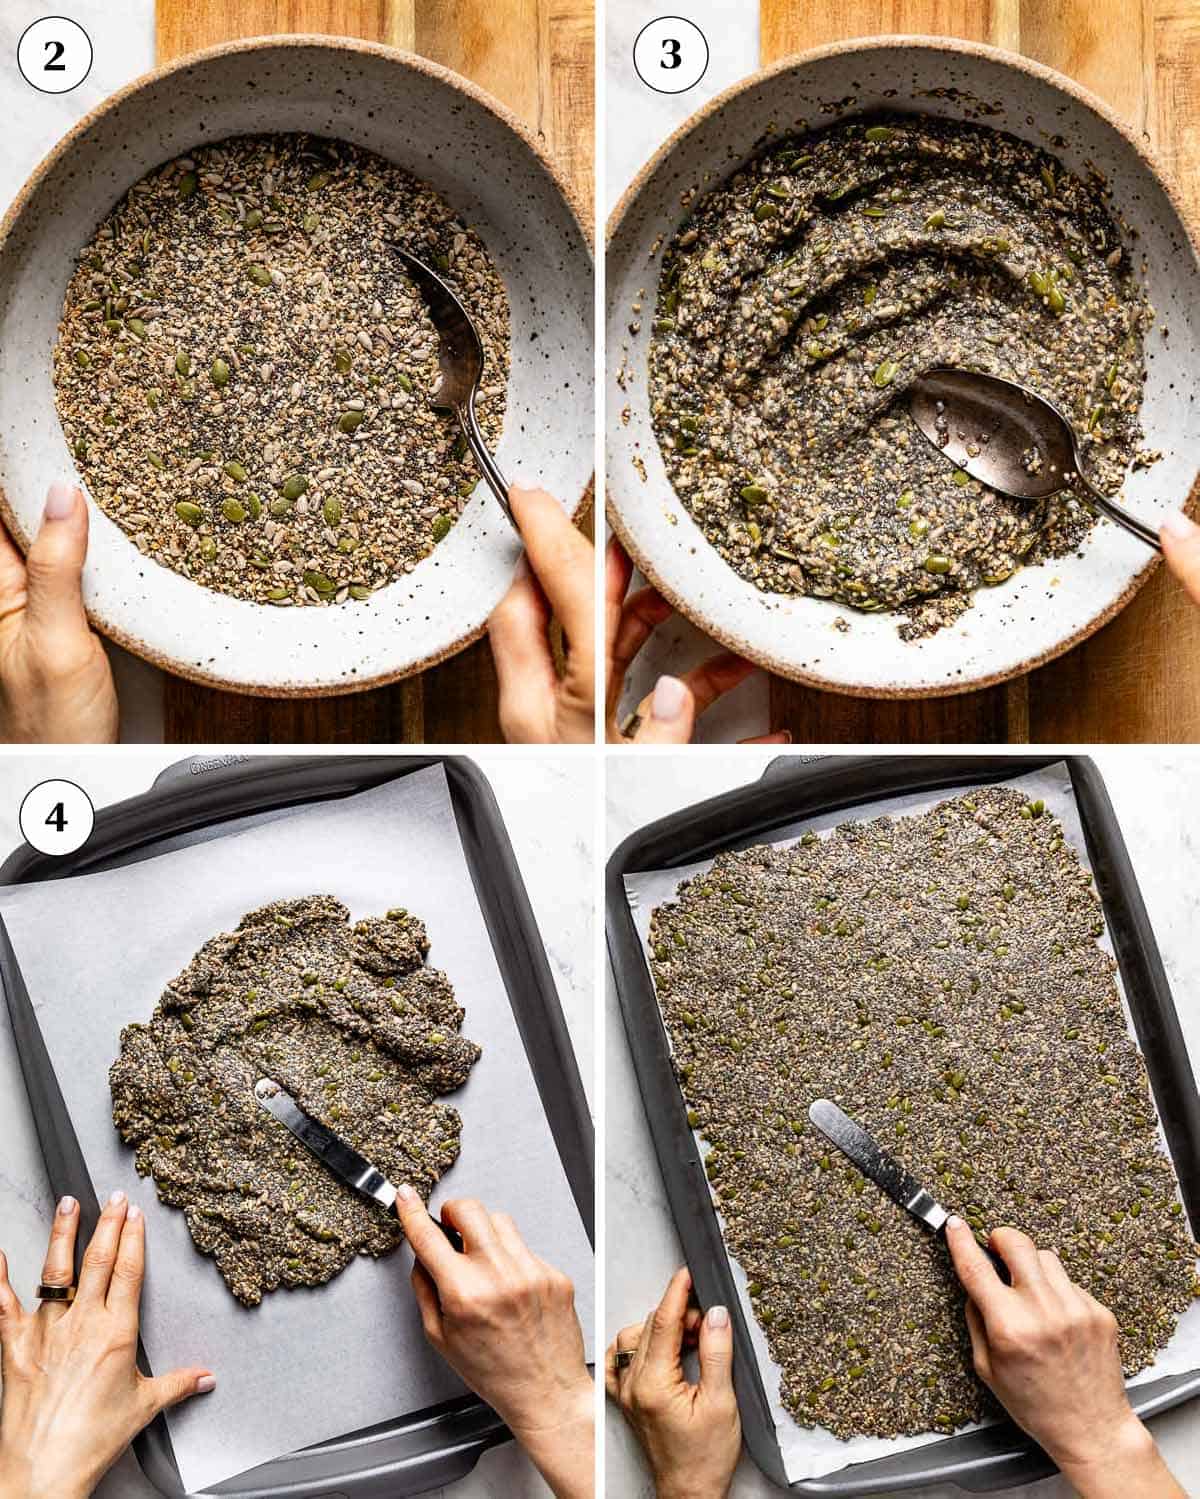 A collage of images showing how to make seed crackers.